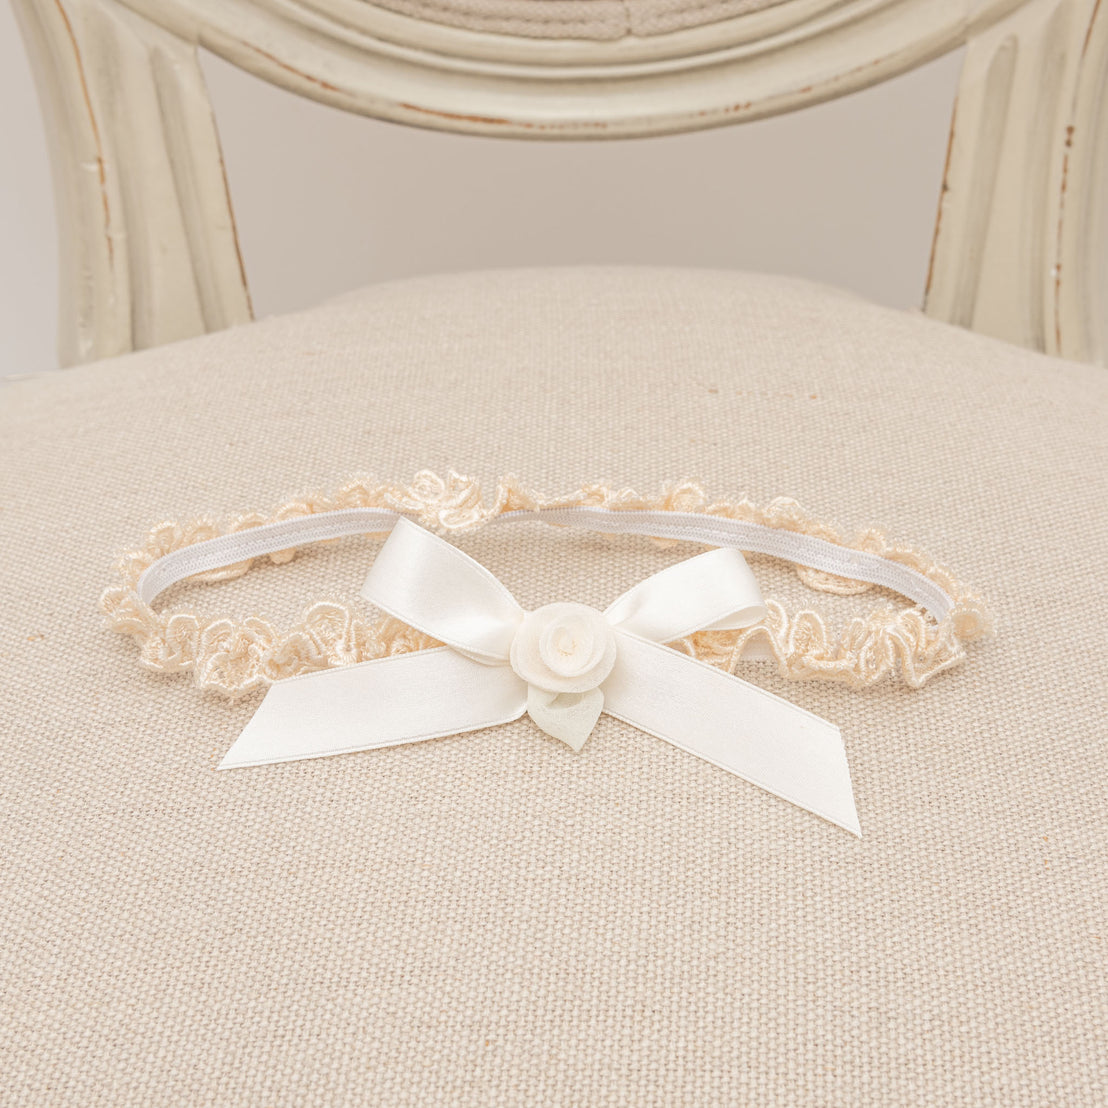 An elegant Kristina Headband with a white satin bow and a delicate white rose, presented on a cushioned chair with creamy upholstery and intricate frame design. Perfect for a baptism or christening.